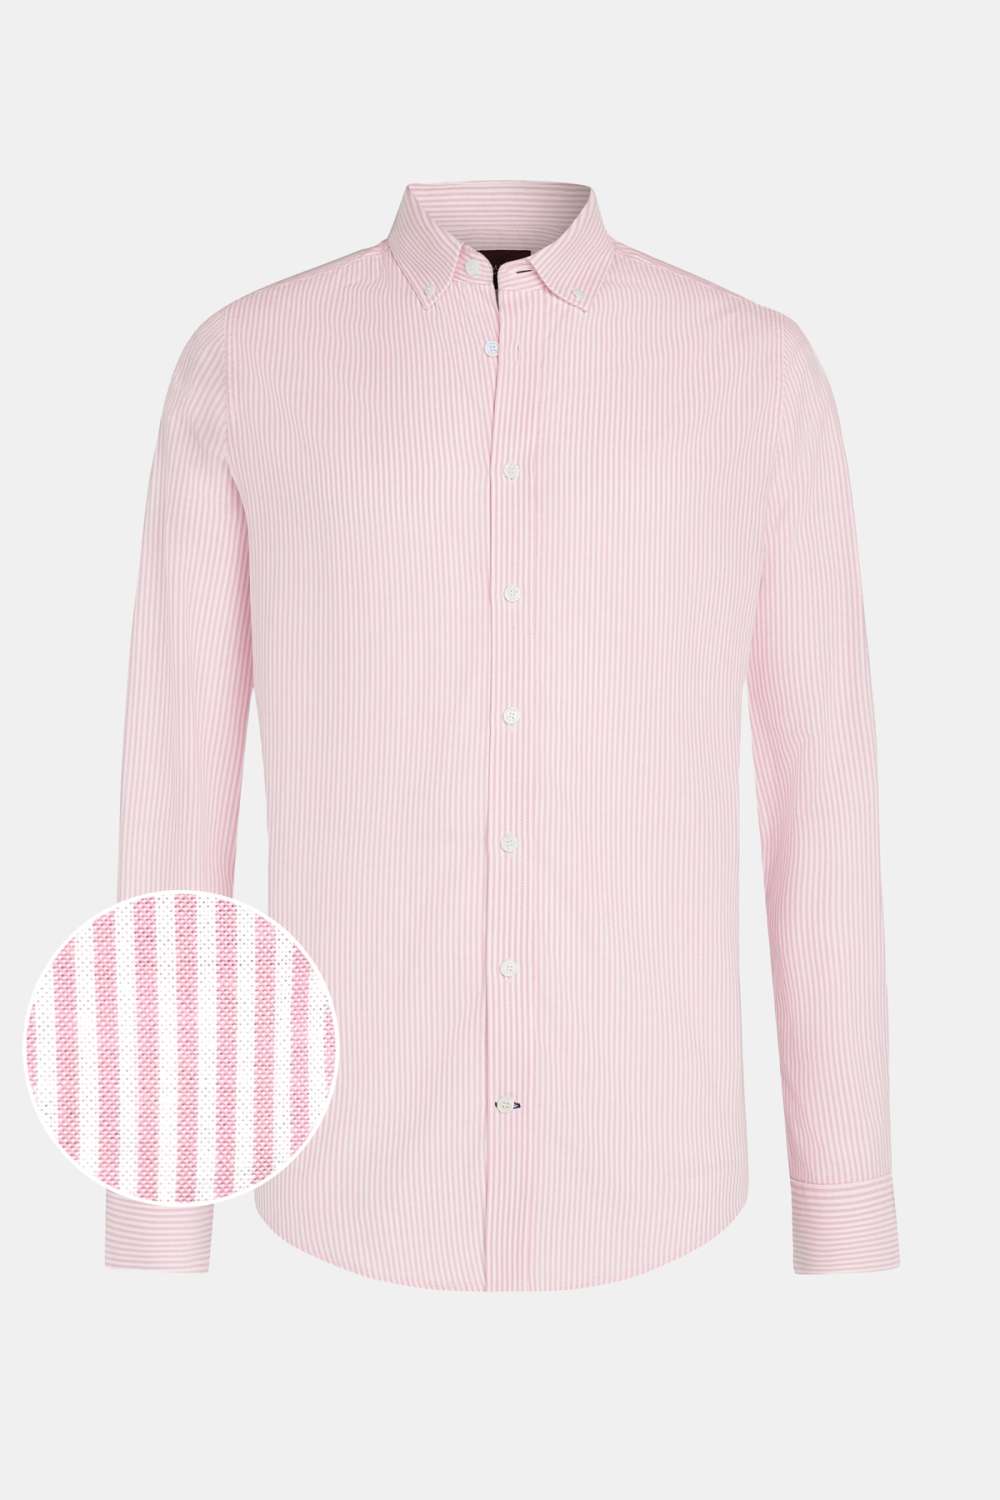 Dinghies * The Oxford Shirt